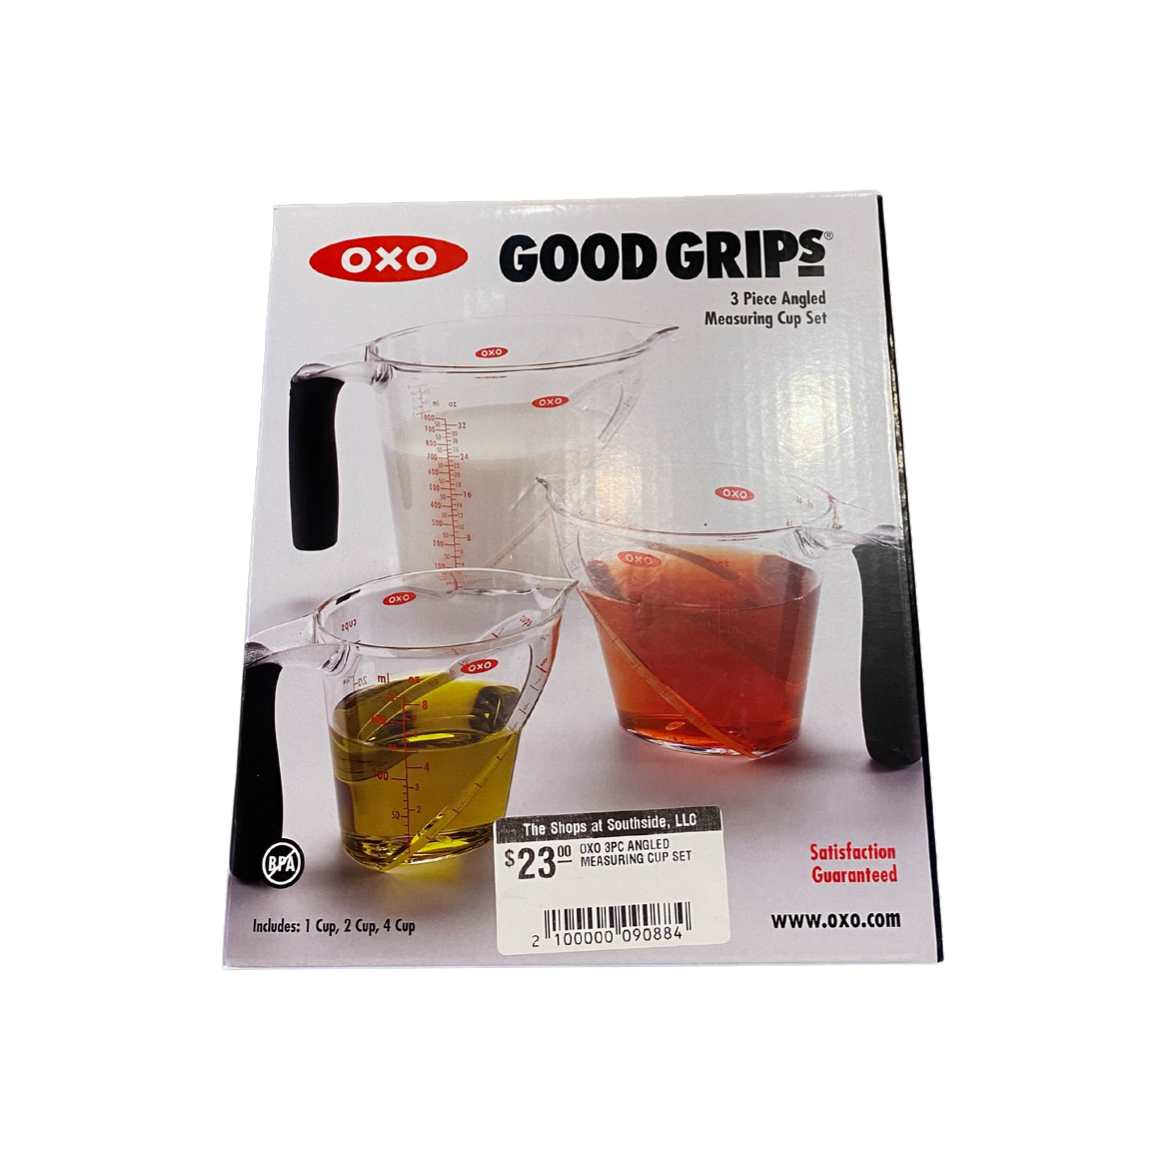 OXO 3PC ANGLED MEASURING CUP SET